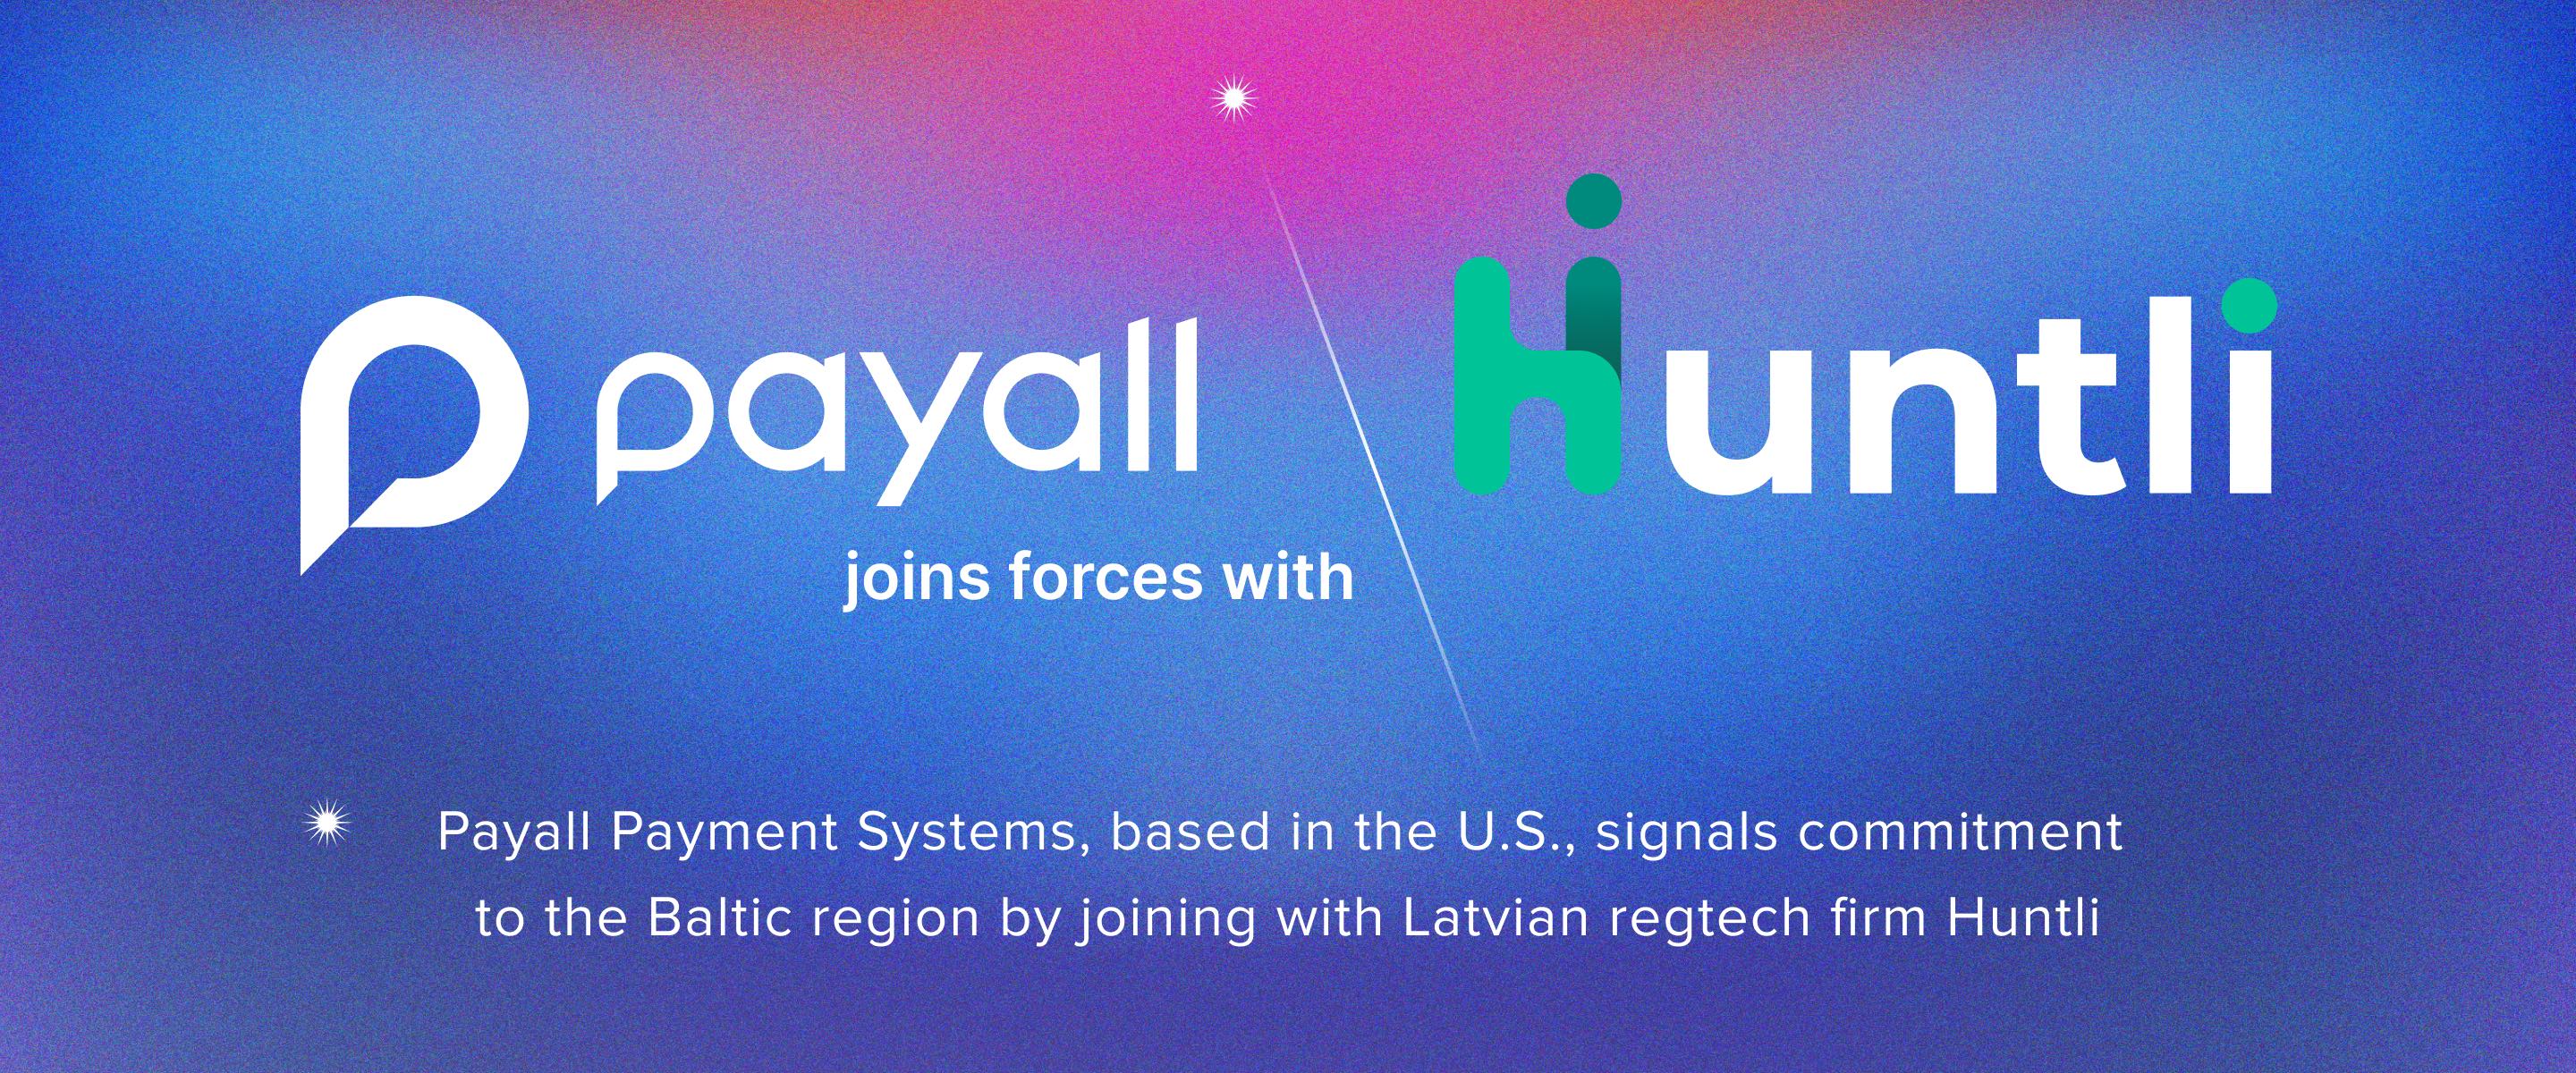 Payall signals commitment to the Baltic region by joining with Latvian regtech firm Huntli